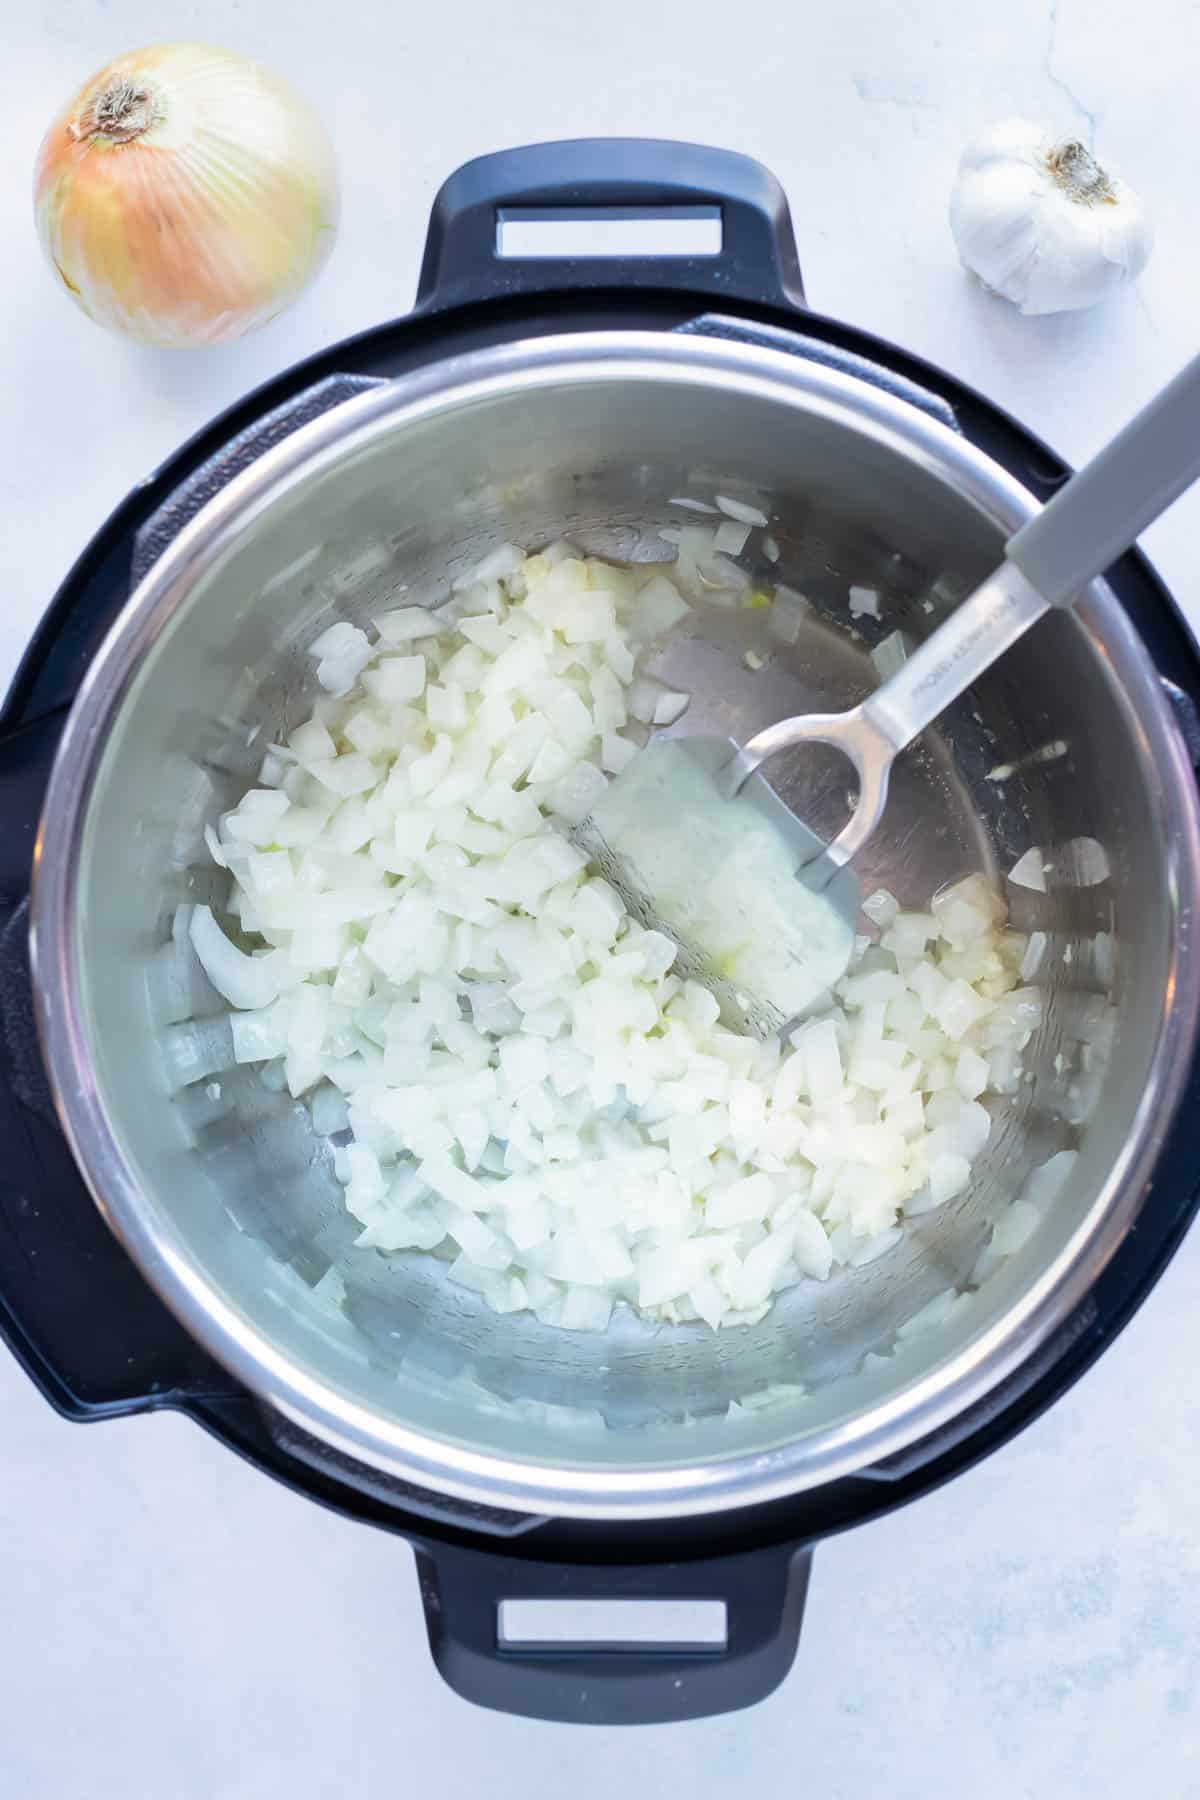 Diced onions are sautéed in the pressure cooker.